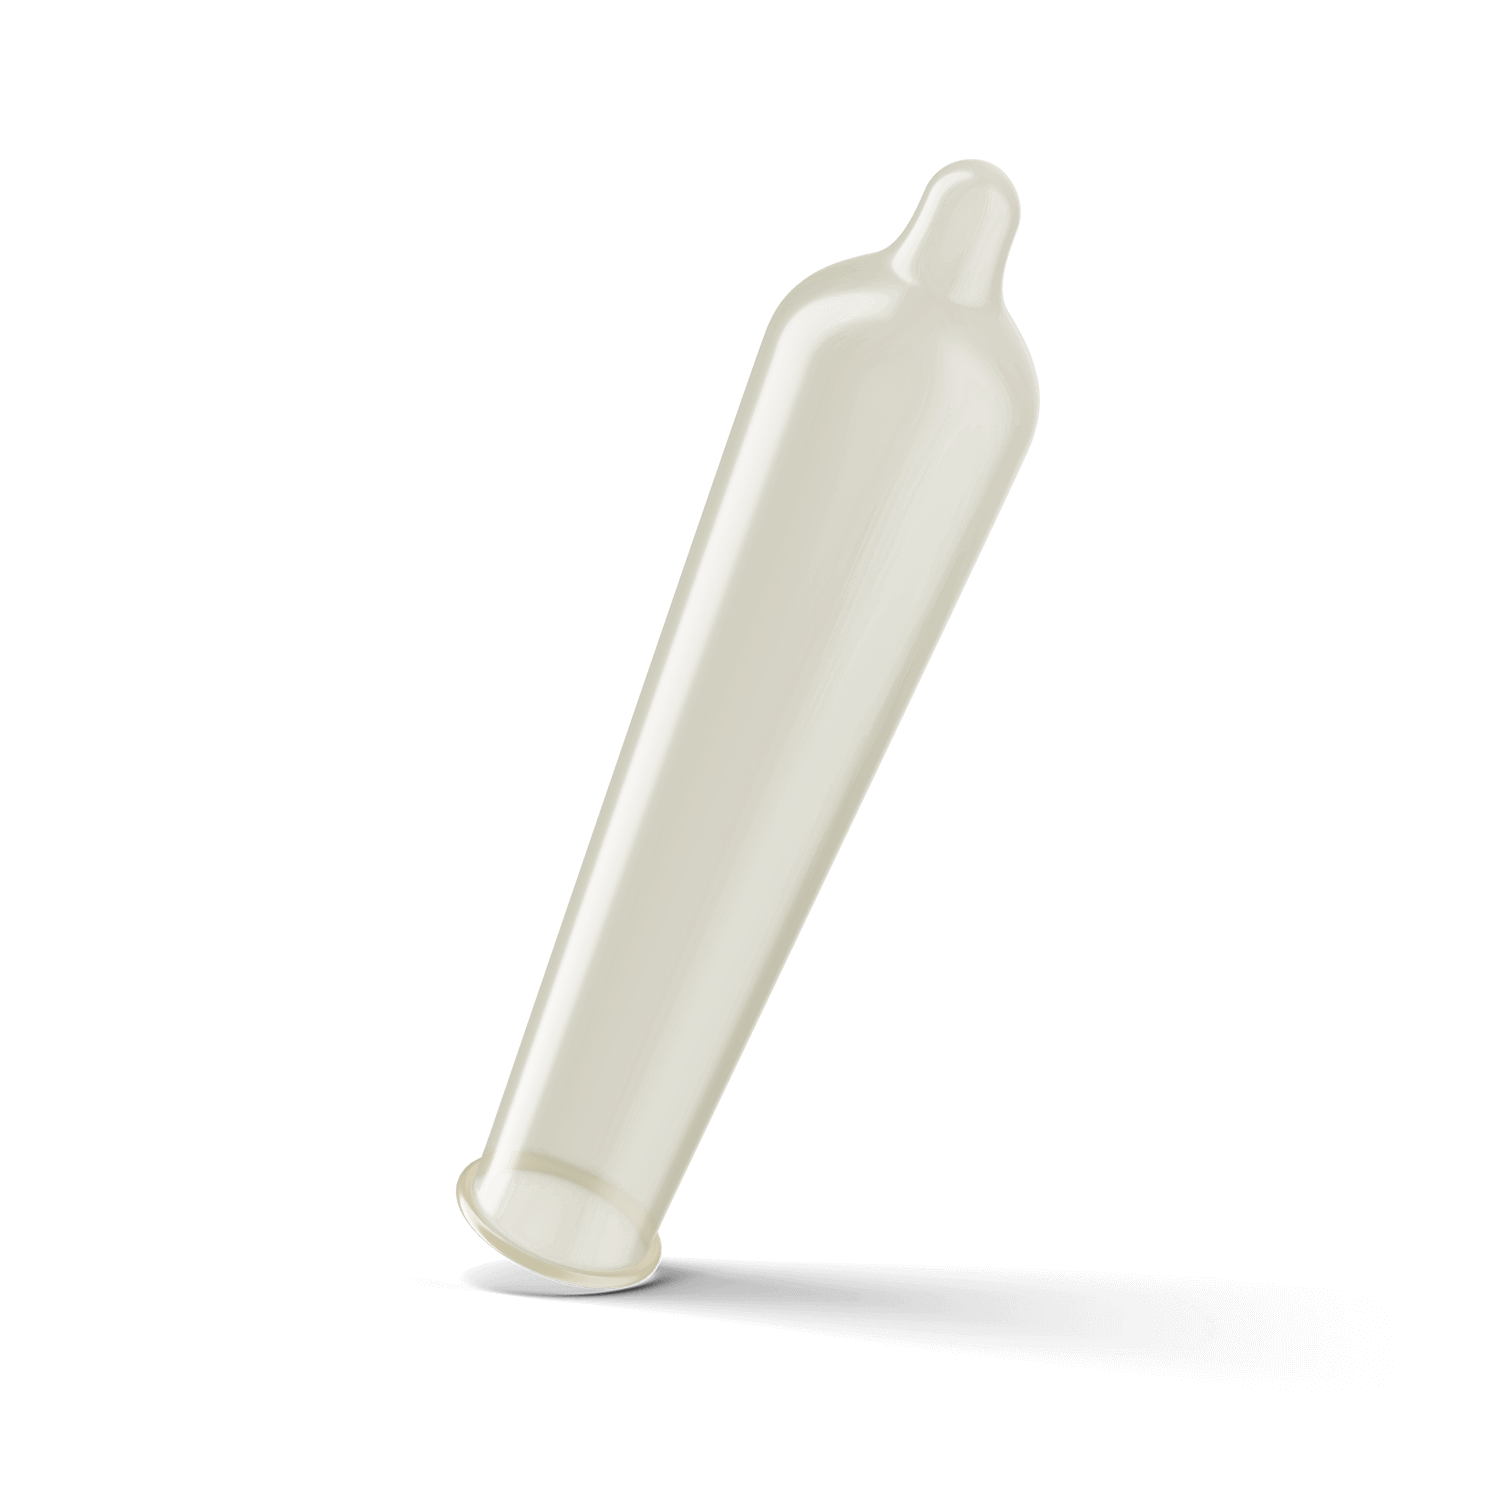 A Trojan Magnum Condom unrolled entirely. This showcases the tapered design that offers more room near the tip of the condom. It also has a resevoir tip. | Kinkly Shop